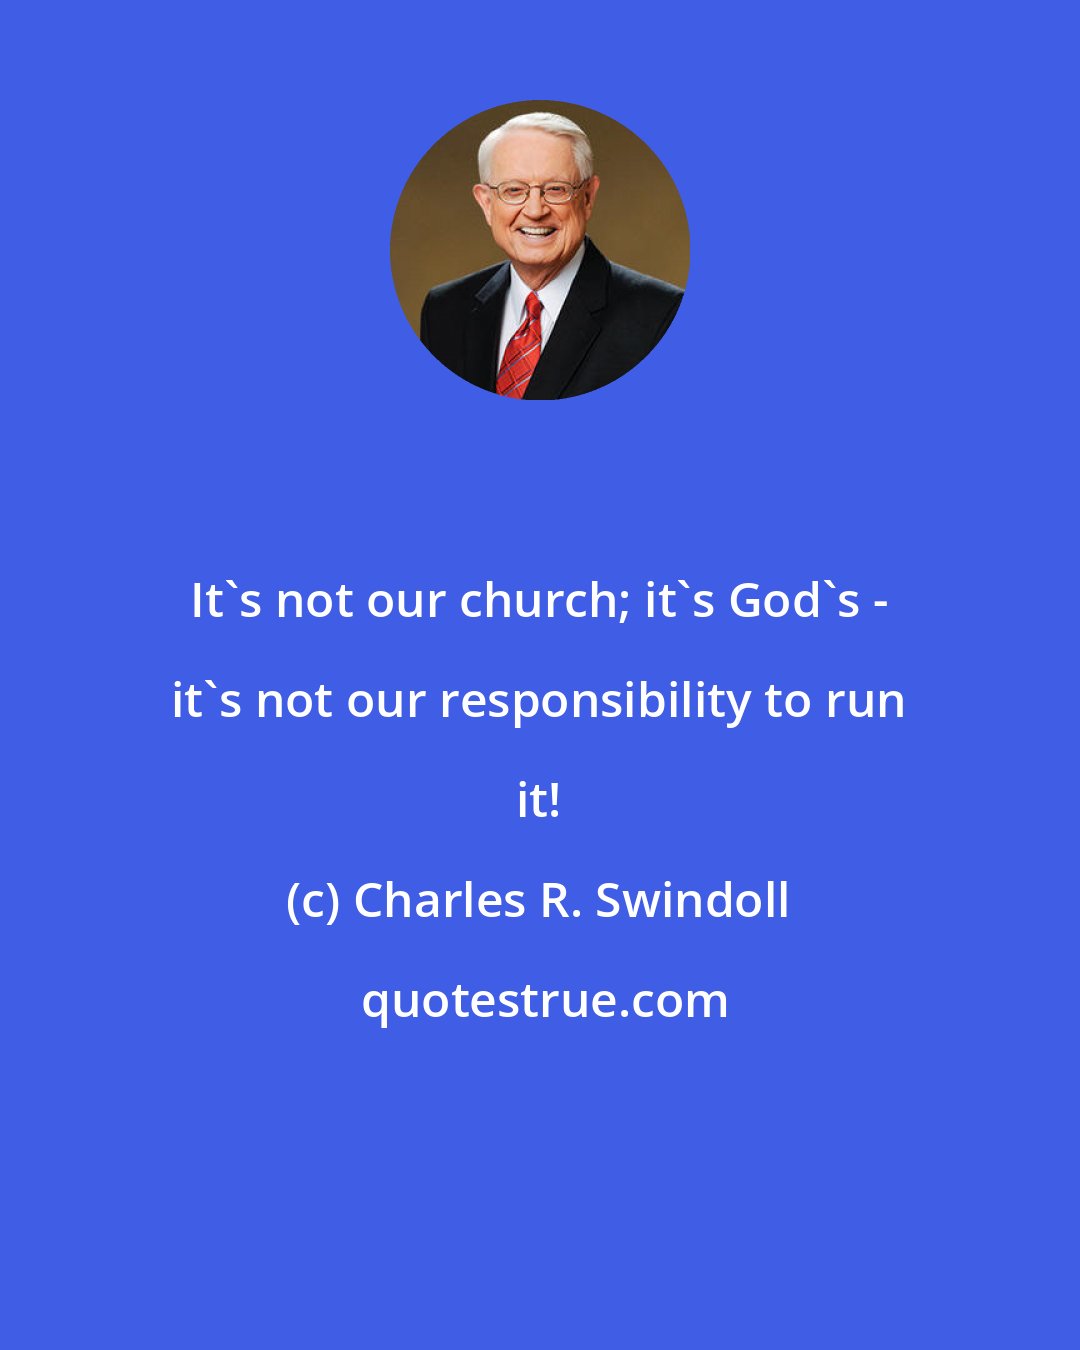 Charles R. Swindoll: It's not our church; it's God's - it's not our responsibility to run it!